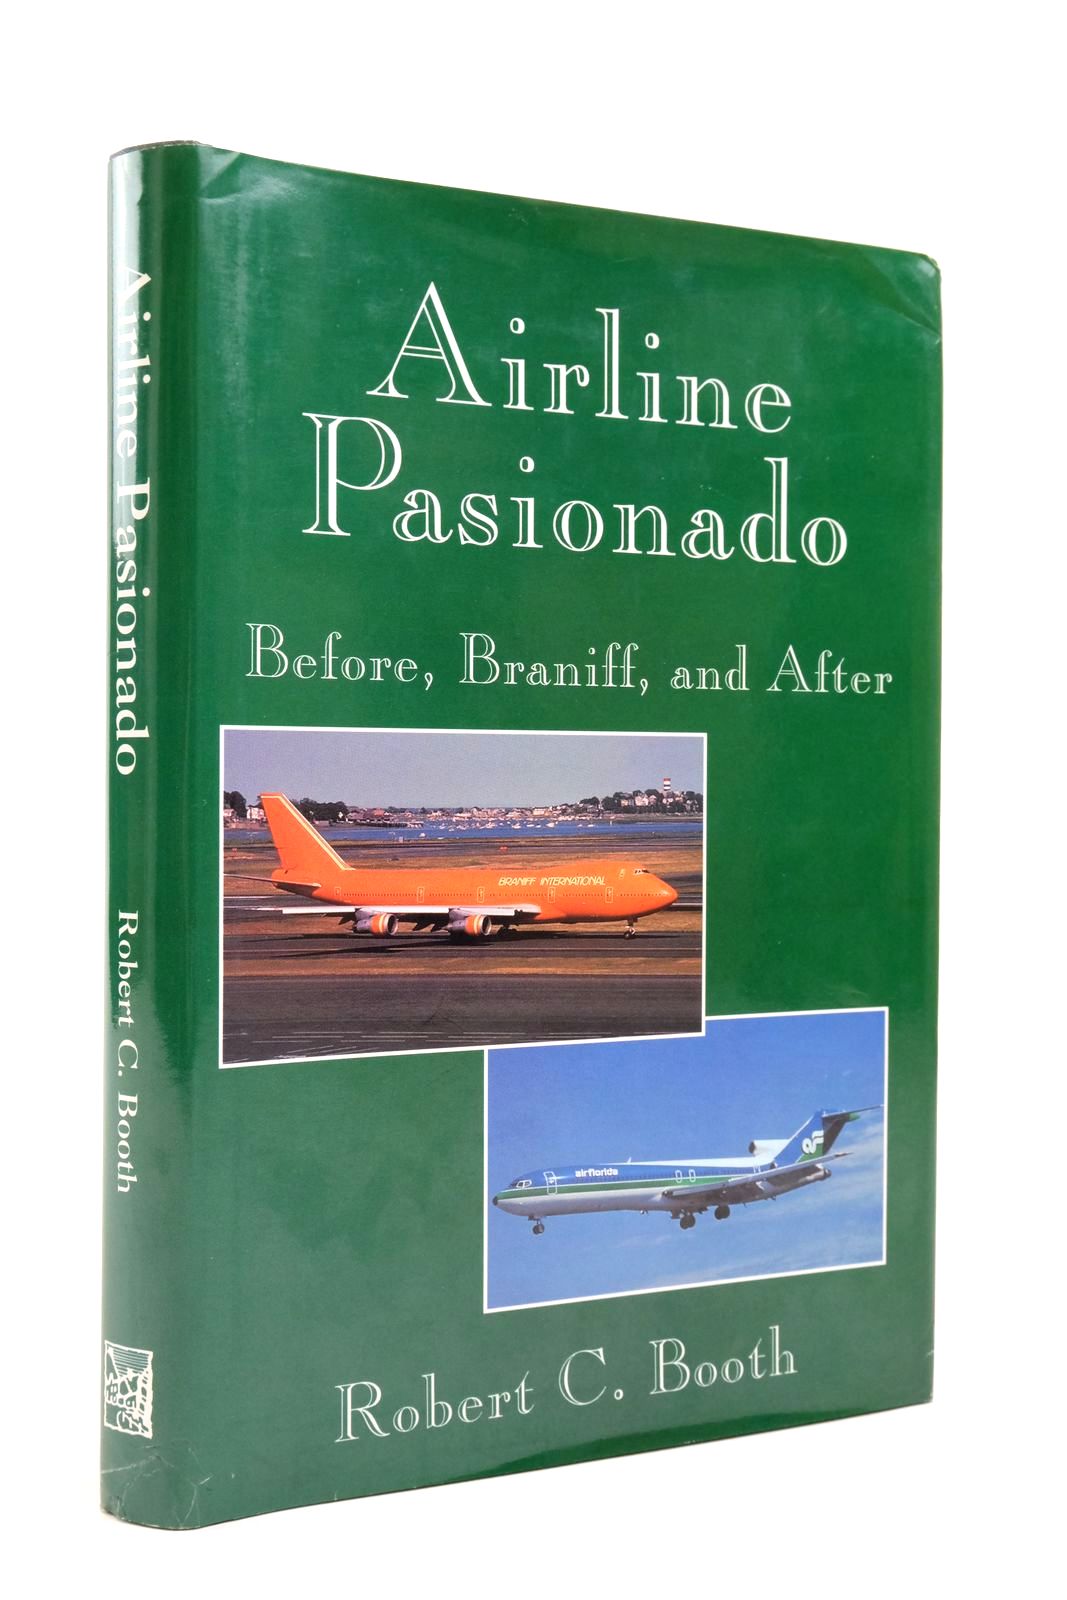 Photo of AIRLINE PASIONADO: BEFORE, BRANIFF, AND AFTER- Stock Number: 2138428